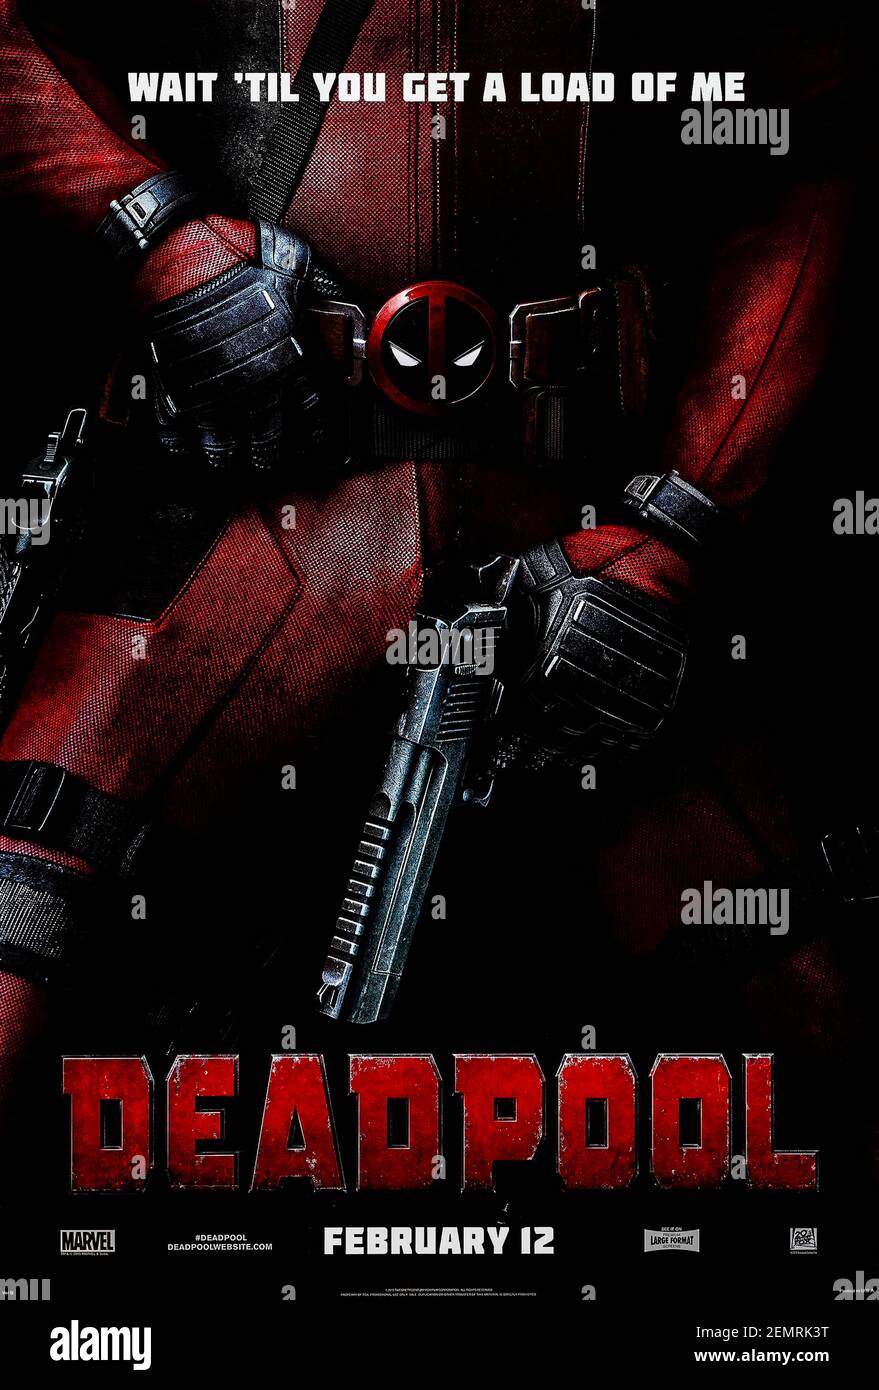 Deadpool (2016) directed by Tim Miller and starring Ryan Reynolds, Morena Baccarin, T.J. Miller and Michael Benyaer. Wisecracking oddball Marvel superhero with a twisted sense of humour is let loose on the silver screen. Stock Photo